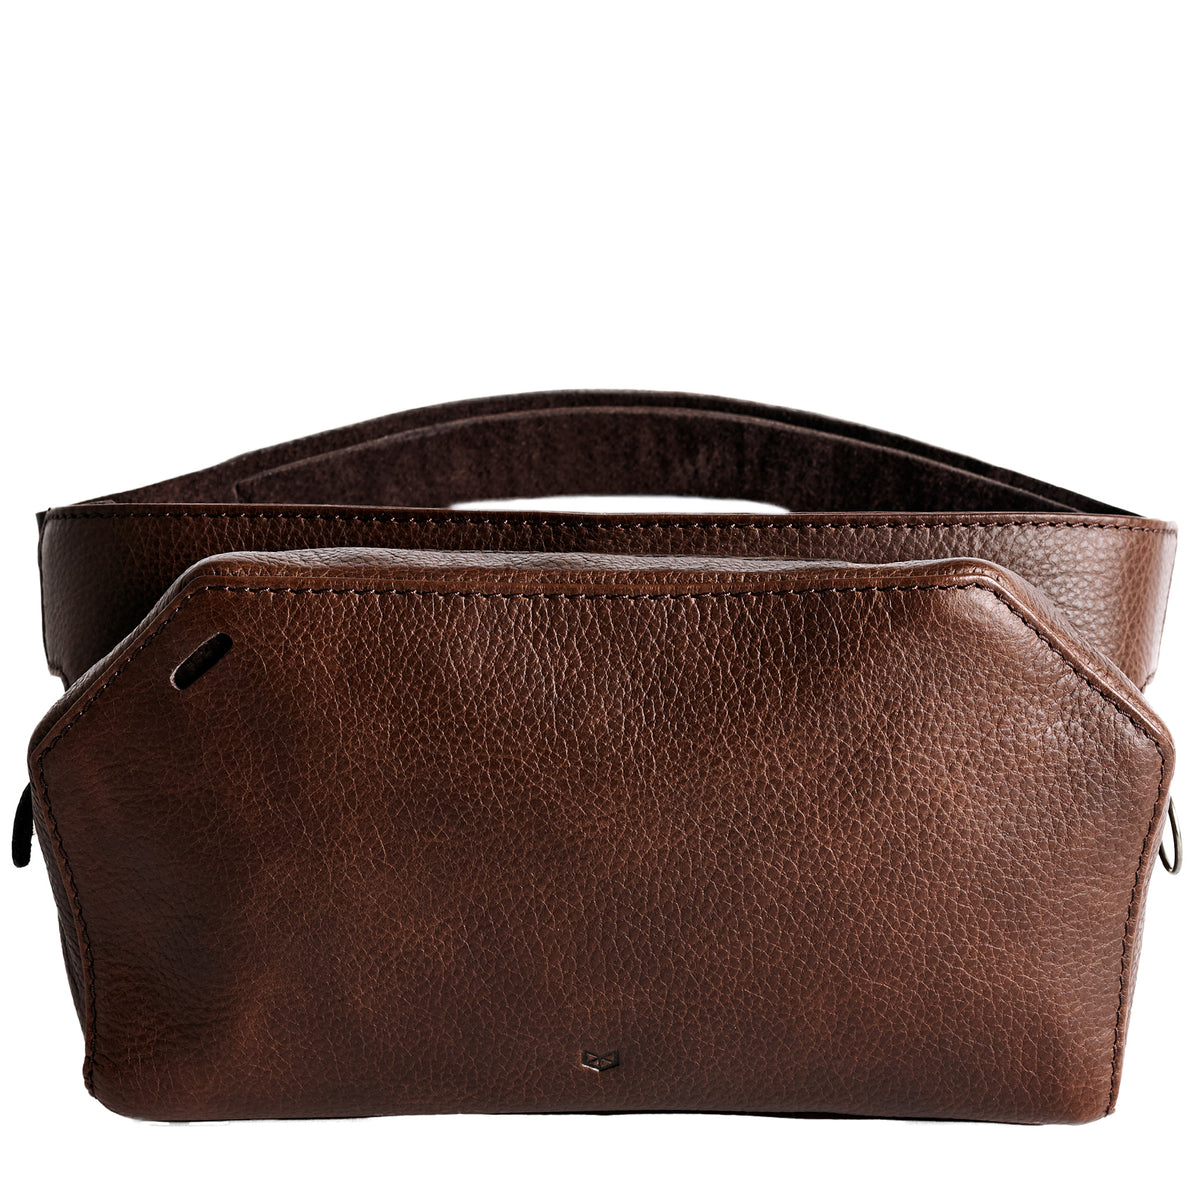 Brown Leather Fanny Pack by Capra